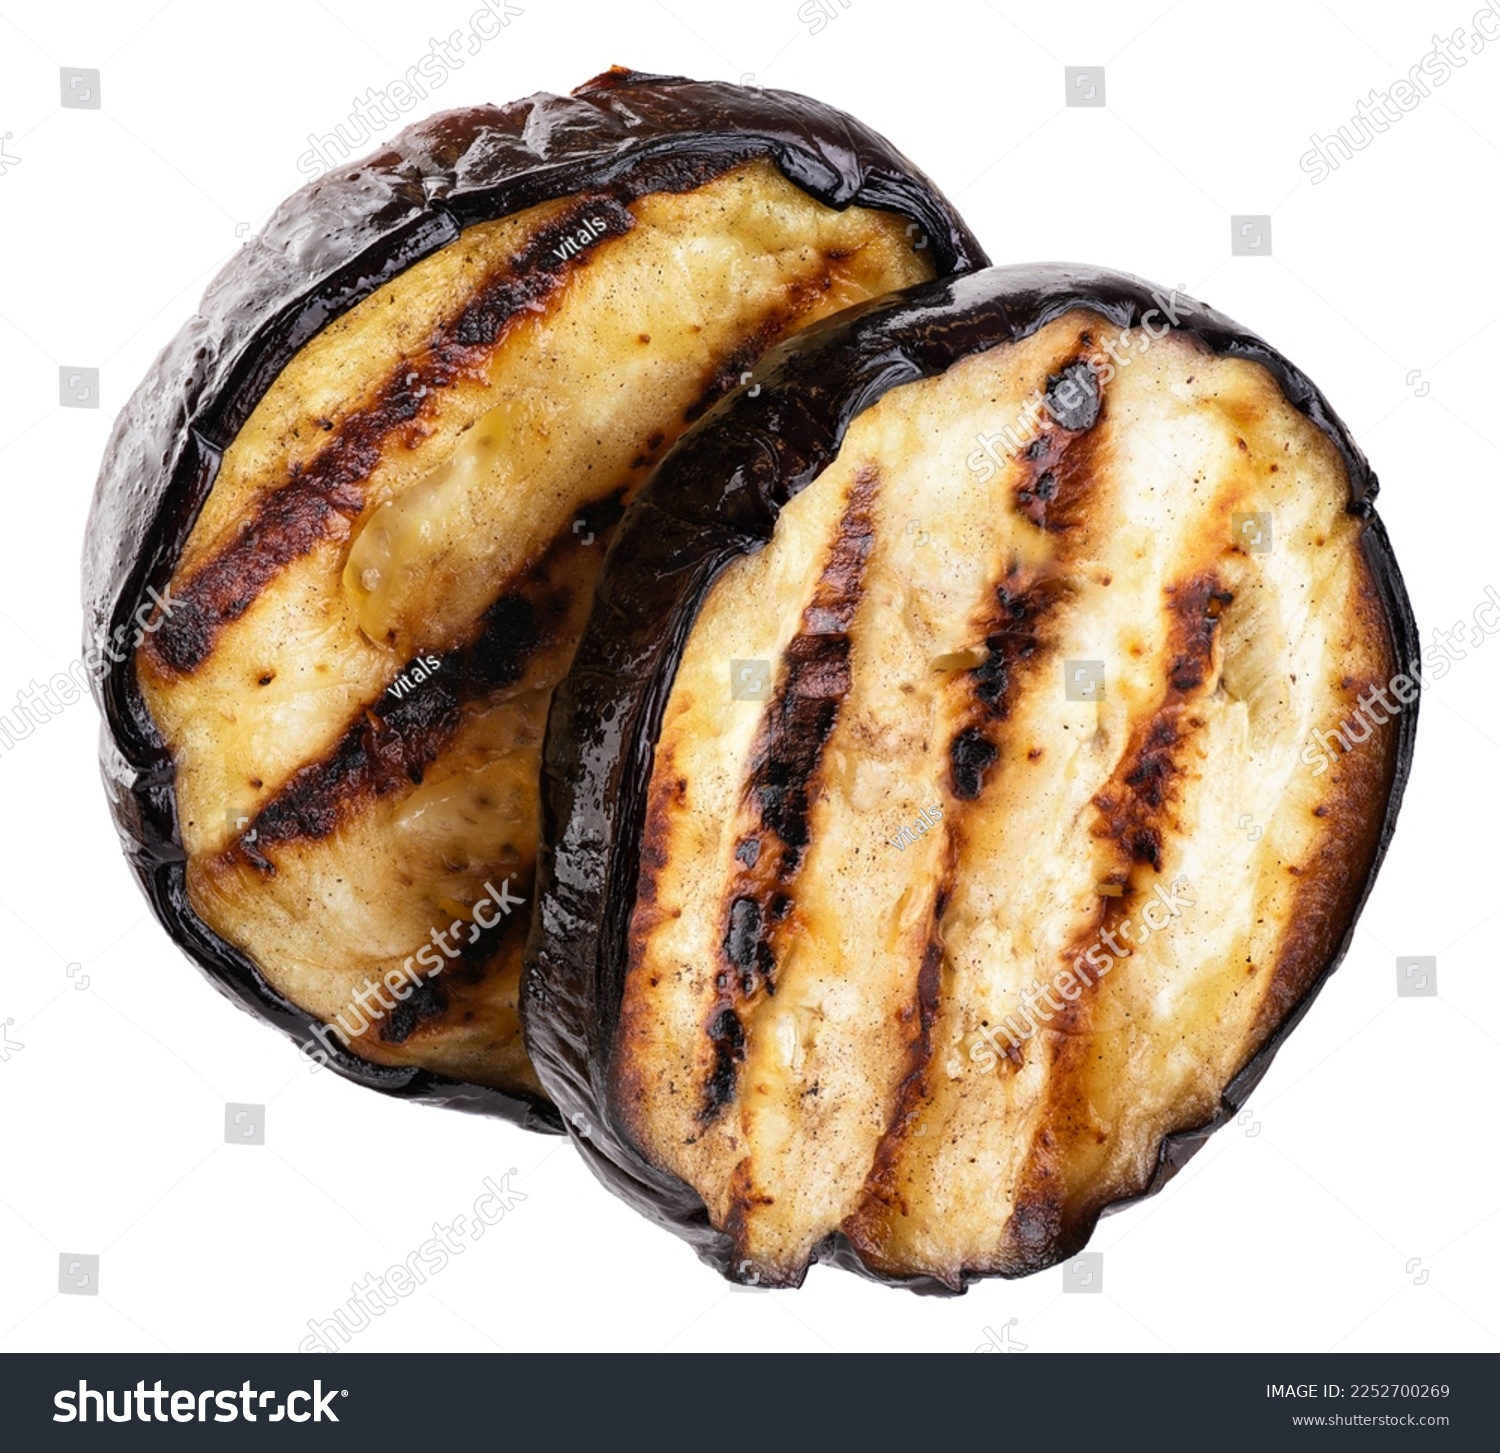 Grilled eggplants aubergine slices isolated on white background. With clipping path. #2252700269